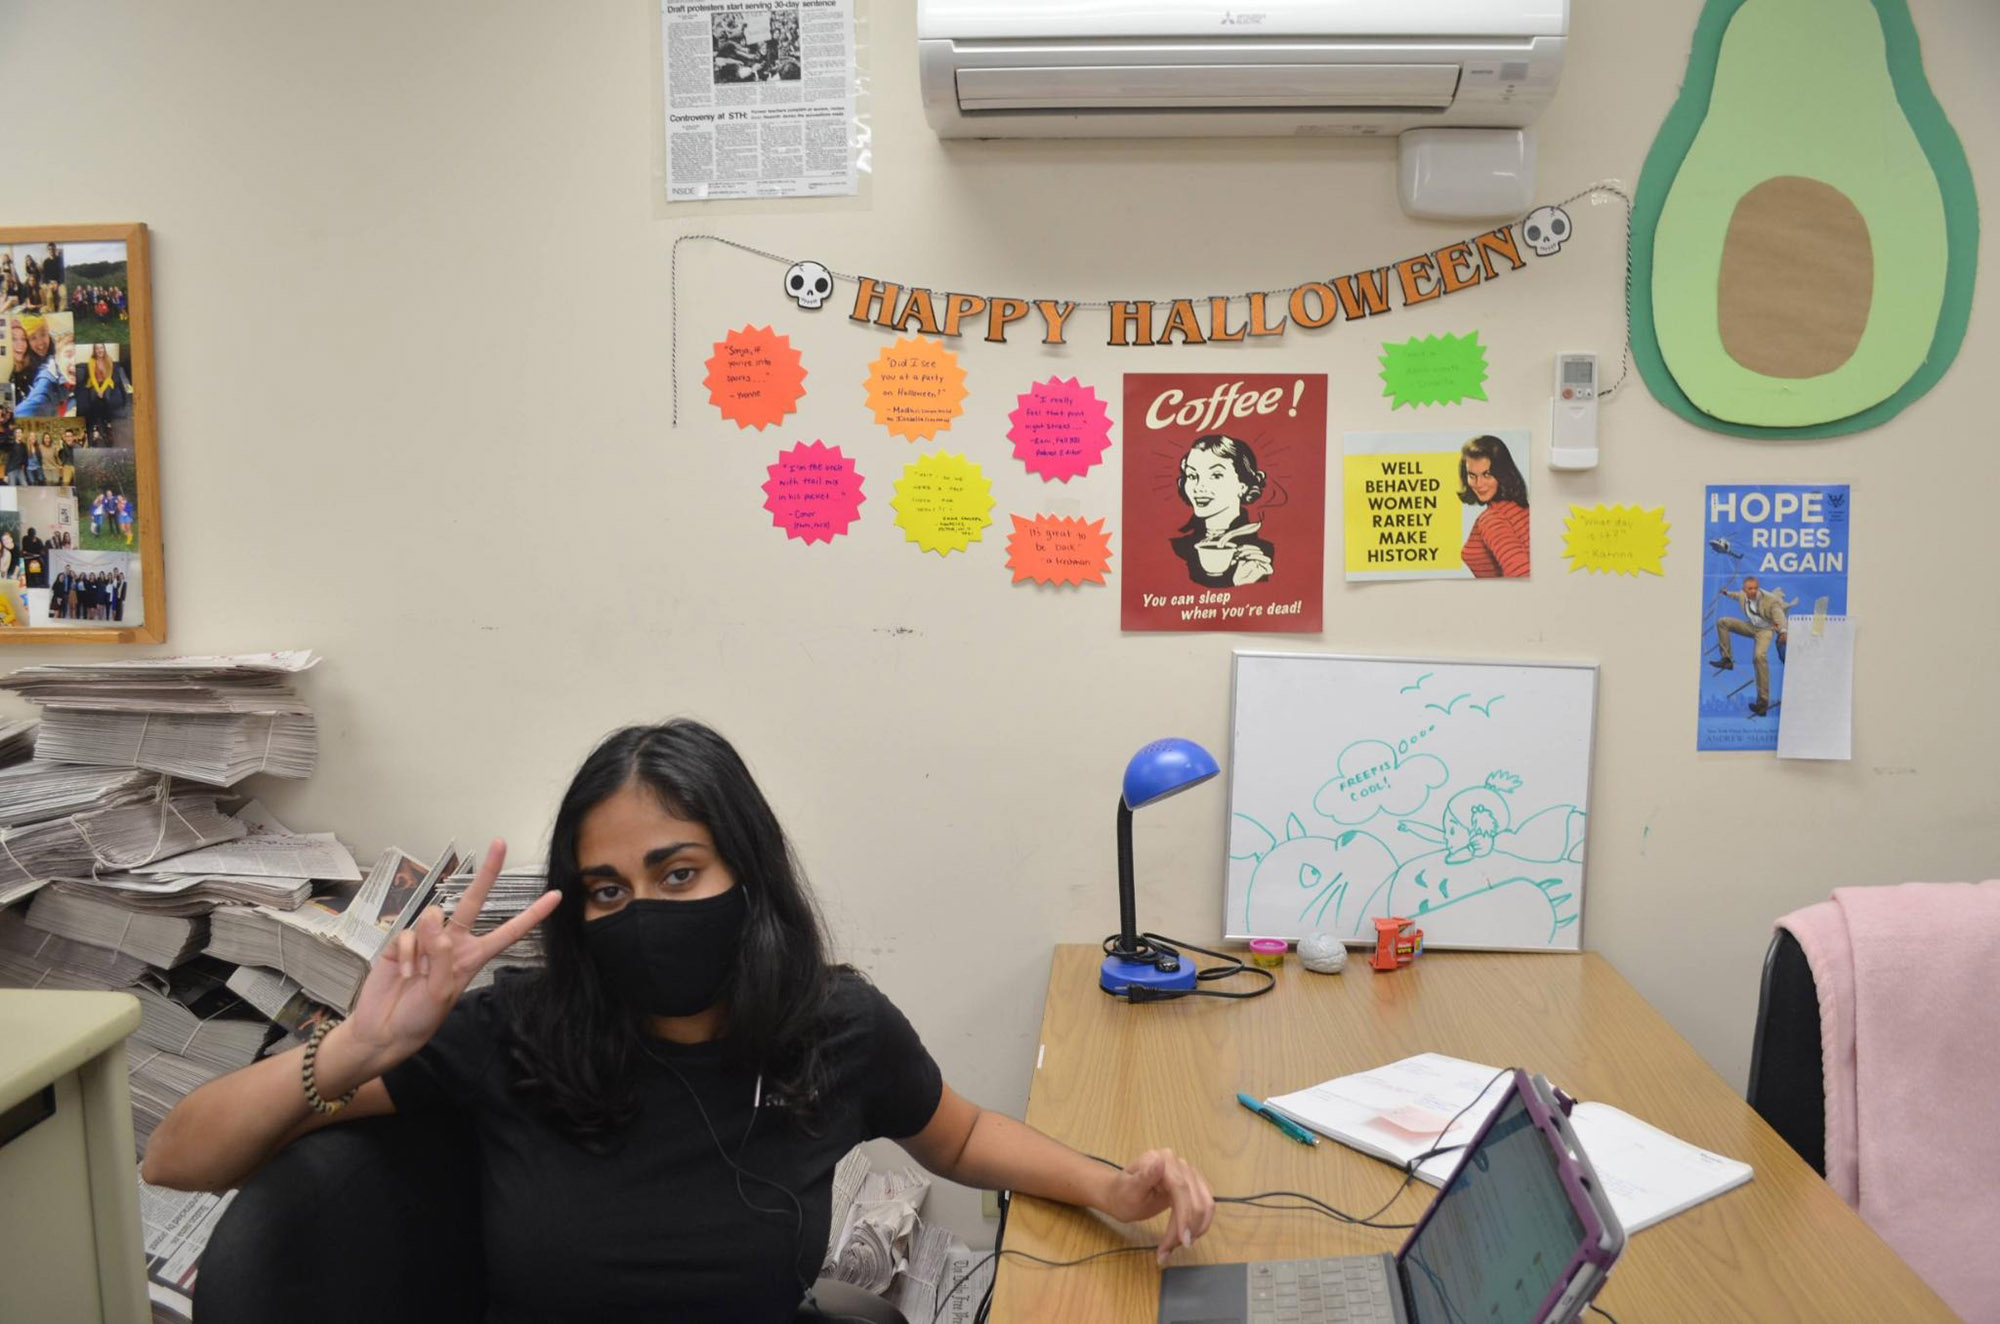 Photo: Madhri Yehiya, a young South Asian woman wearing a black mask and black shirt, looks tot he camera and poses as she sits at a desk with small laptop open in front of her. Stray papers can be seen around her.